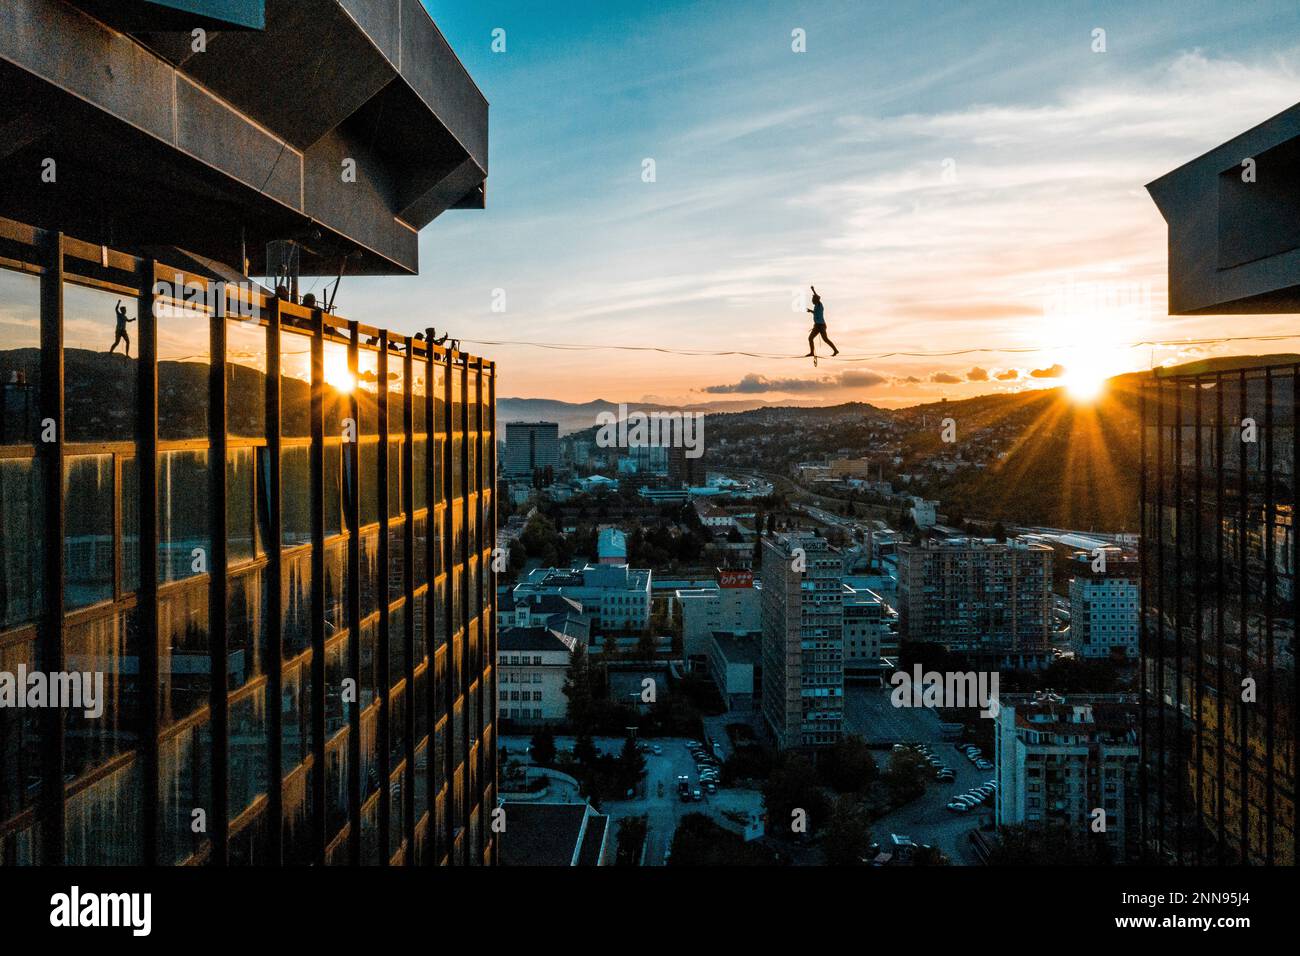 Estonian slackliner Jaan Roose performed a series of breathtaking tricks on a 28-metre-long slackline between the iconic Unitic skyscrapers in Sarajevo. Former parkour athlete Roose has been involved in slacklining for 11 years since he was 18 and has become a three-time world champion plus the only person able to do a double upside down somersault on a rope. // Jaan Roose of Estonia performs during the Unitic Towers Slacking in Sarajevo, Bosnia-Herzegovina on May 6, 2021. // Predrag Vuckovic / Red Bull Content Pool via AP Images // For more content, pictures and videos like this please go to  Stock Photo